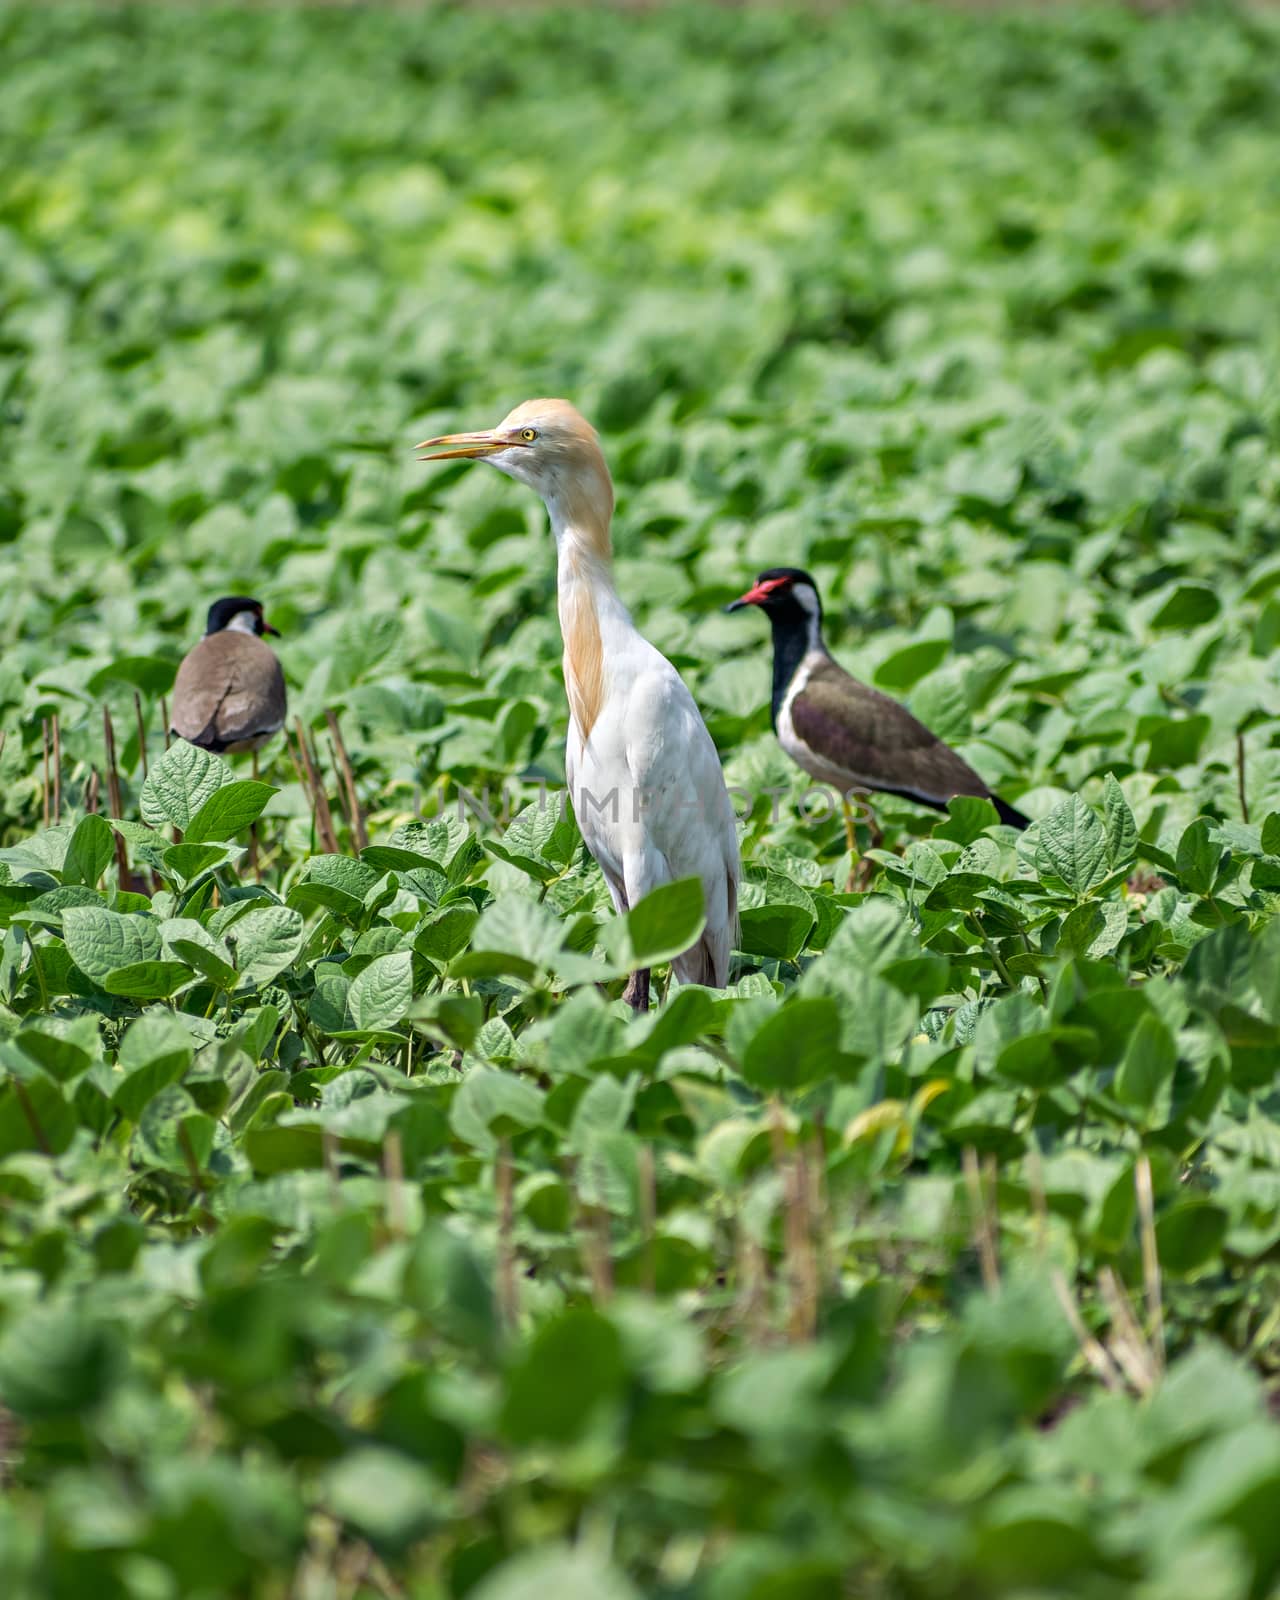 Close up image of Cattle Egret bird with Red Wattled Lapwing  in a field near Sasan Gir, Gujrat, India.